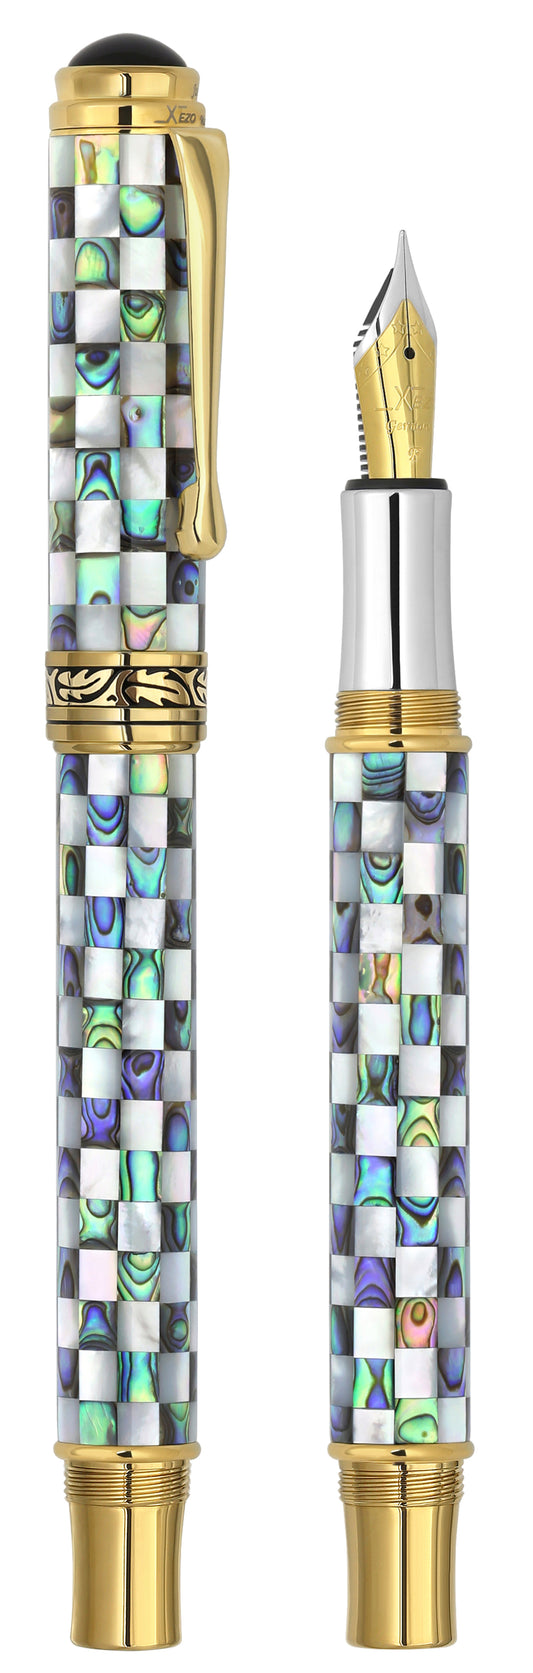 Vertical view of two Maestro Jubilee Classic of the Ocean FG fine fountain pens. The pen on the left is capped, and the pen on the right has no cap